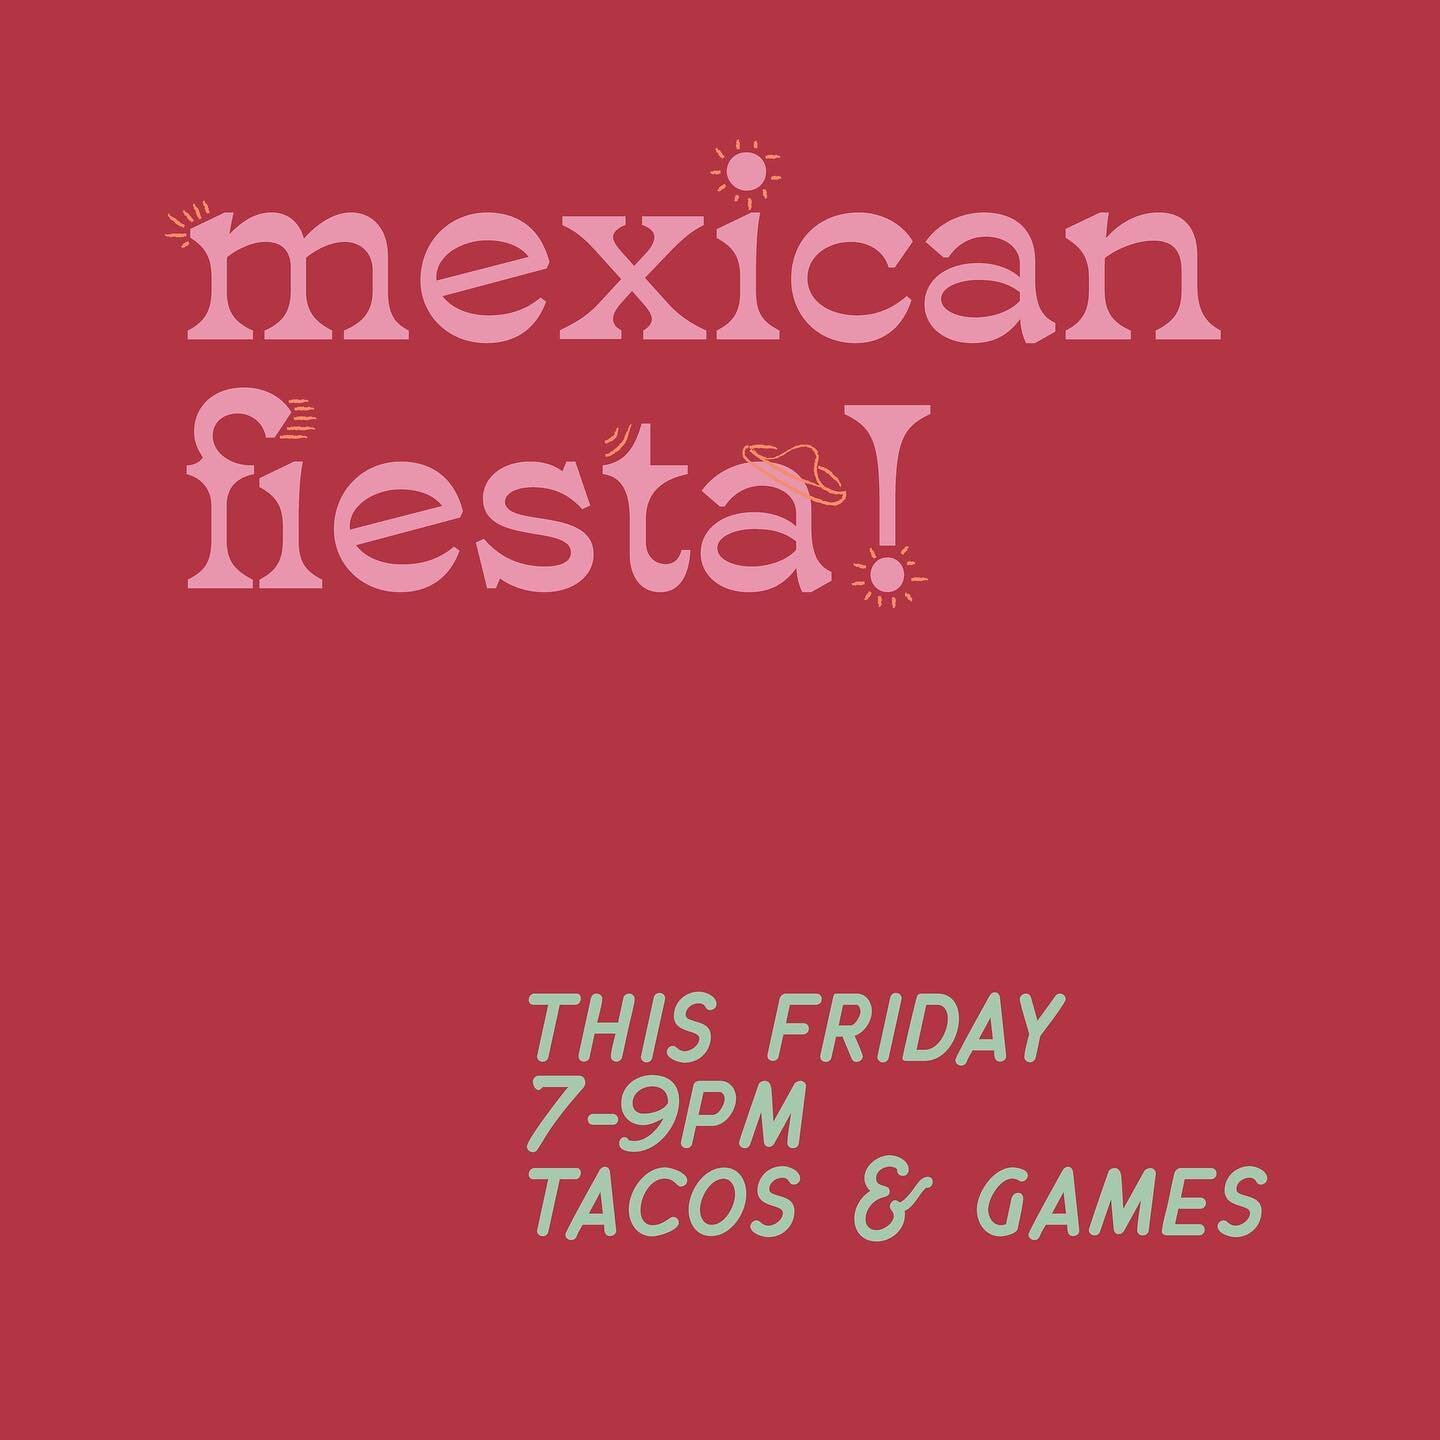 Tomorrow night we are wrapping up the term with some tacos 🌮 and minute to win it games 🌶✨

Invite your friends and come ready to win! Same time, same place 🔥